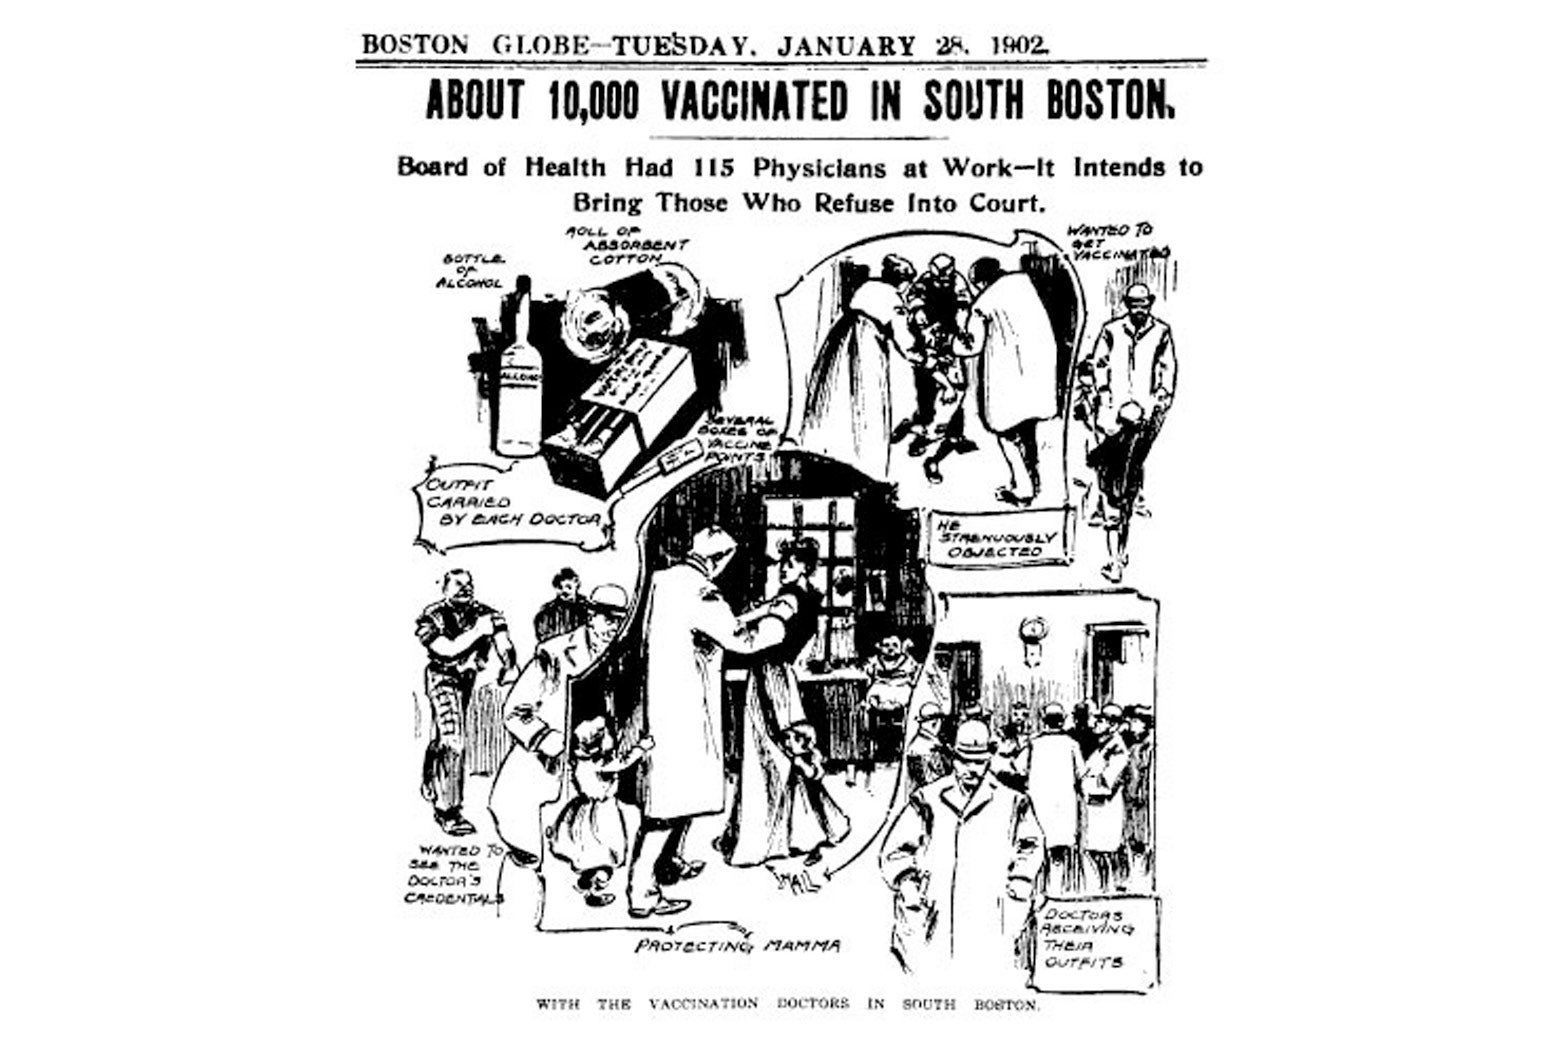 Newspaper illustration of doctors from the board of health going door to door to vaccinate people. The headline warns that those who refuse will be brought to court.